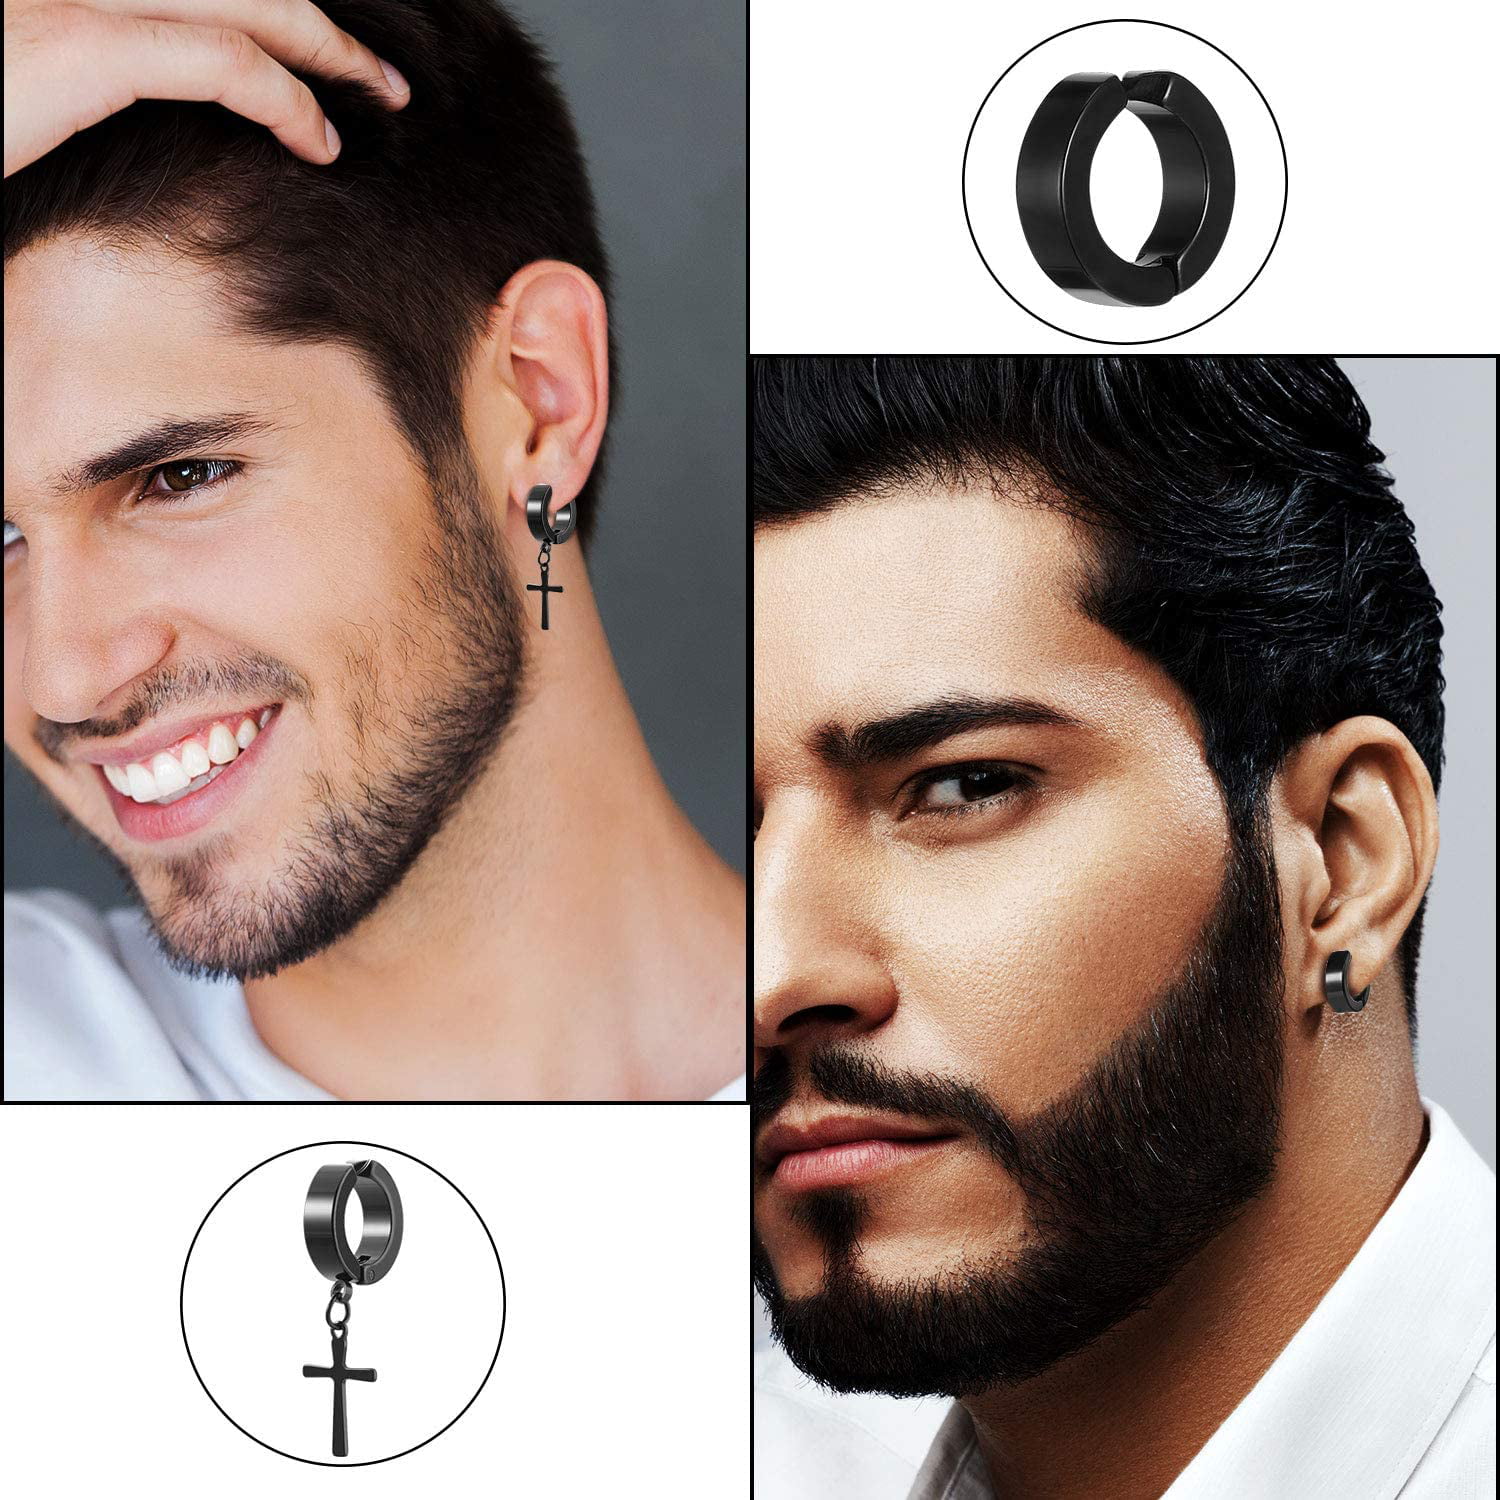 EIELO Clip on Earrings for Men Stainless Steel Fake Cross Dangle Earrings  Silver Black Clip on Fake Earring Set, Stainless Steel, No Gemstone :  Amazon.ca: Clothing, Shoes & Accessories